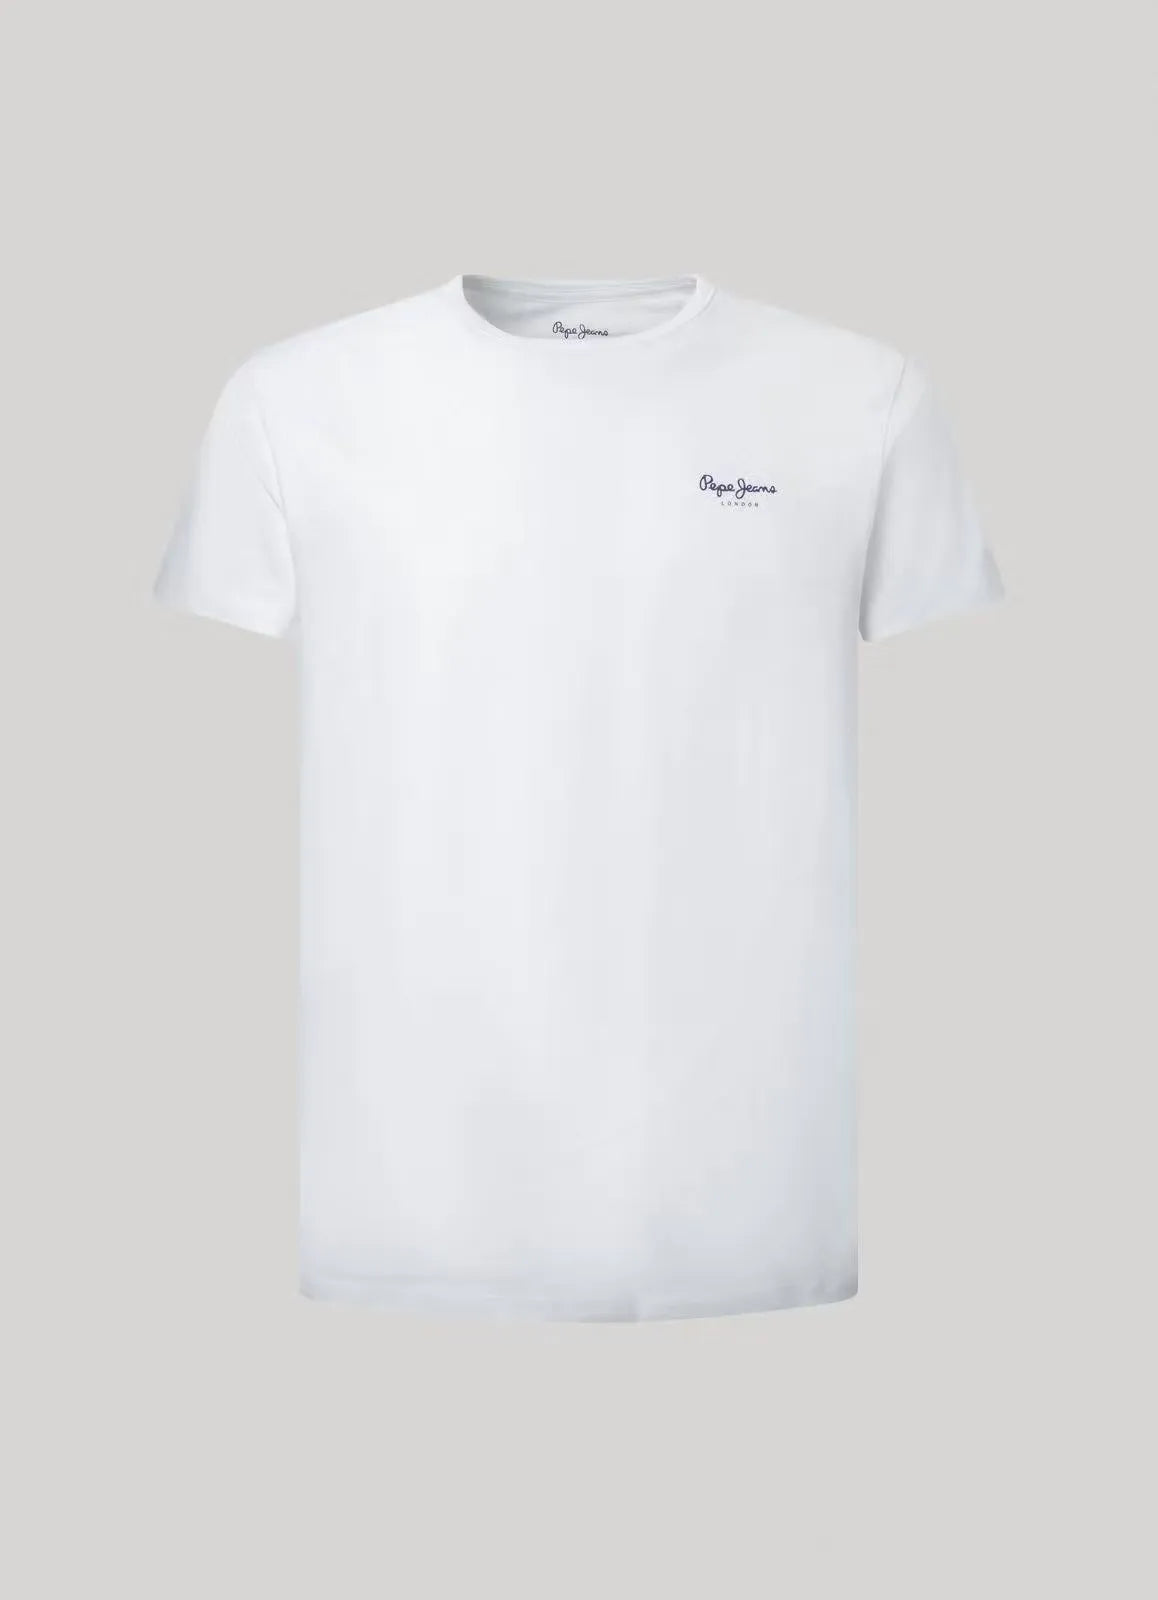 Pepe Jeans t-shirt featuring a bold, printed logo. Crafted from comfortable cotton for a casual and stylish look. Shop Dubailisit! Pepe Jeans Printed Logo T-Shirt Stand Out in Style with this Trendy Essential